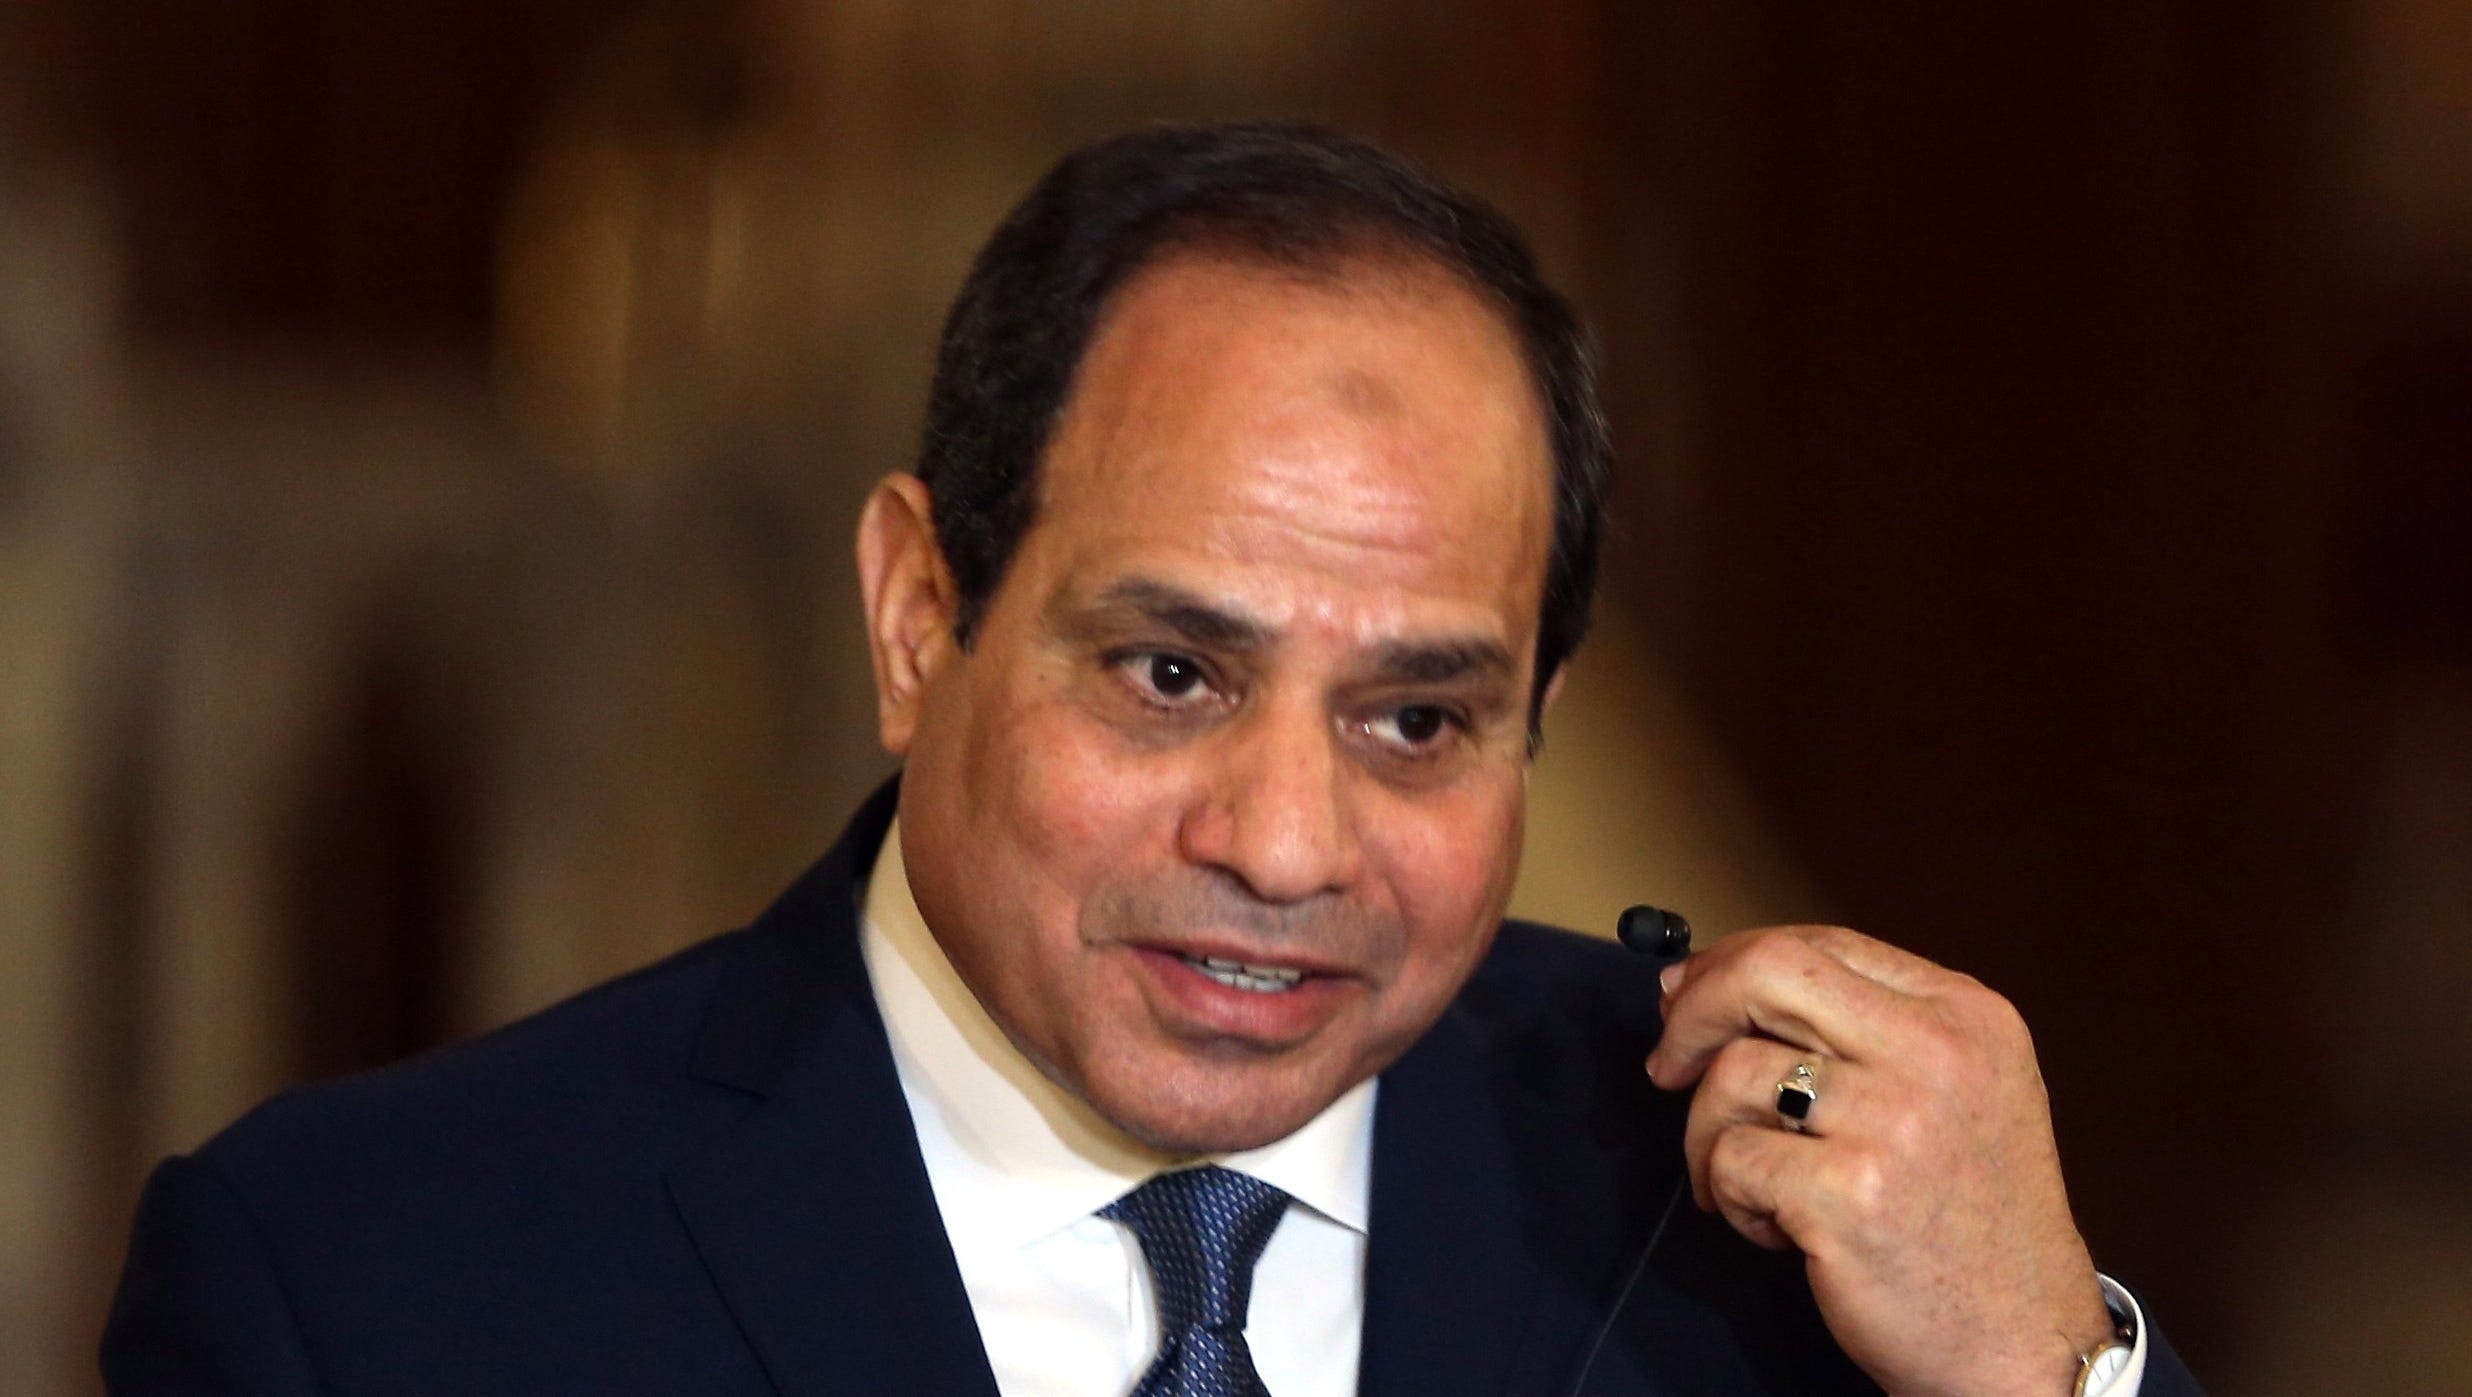 Egyptian President Abdel Fattah elSisi 5 things to know